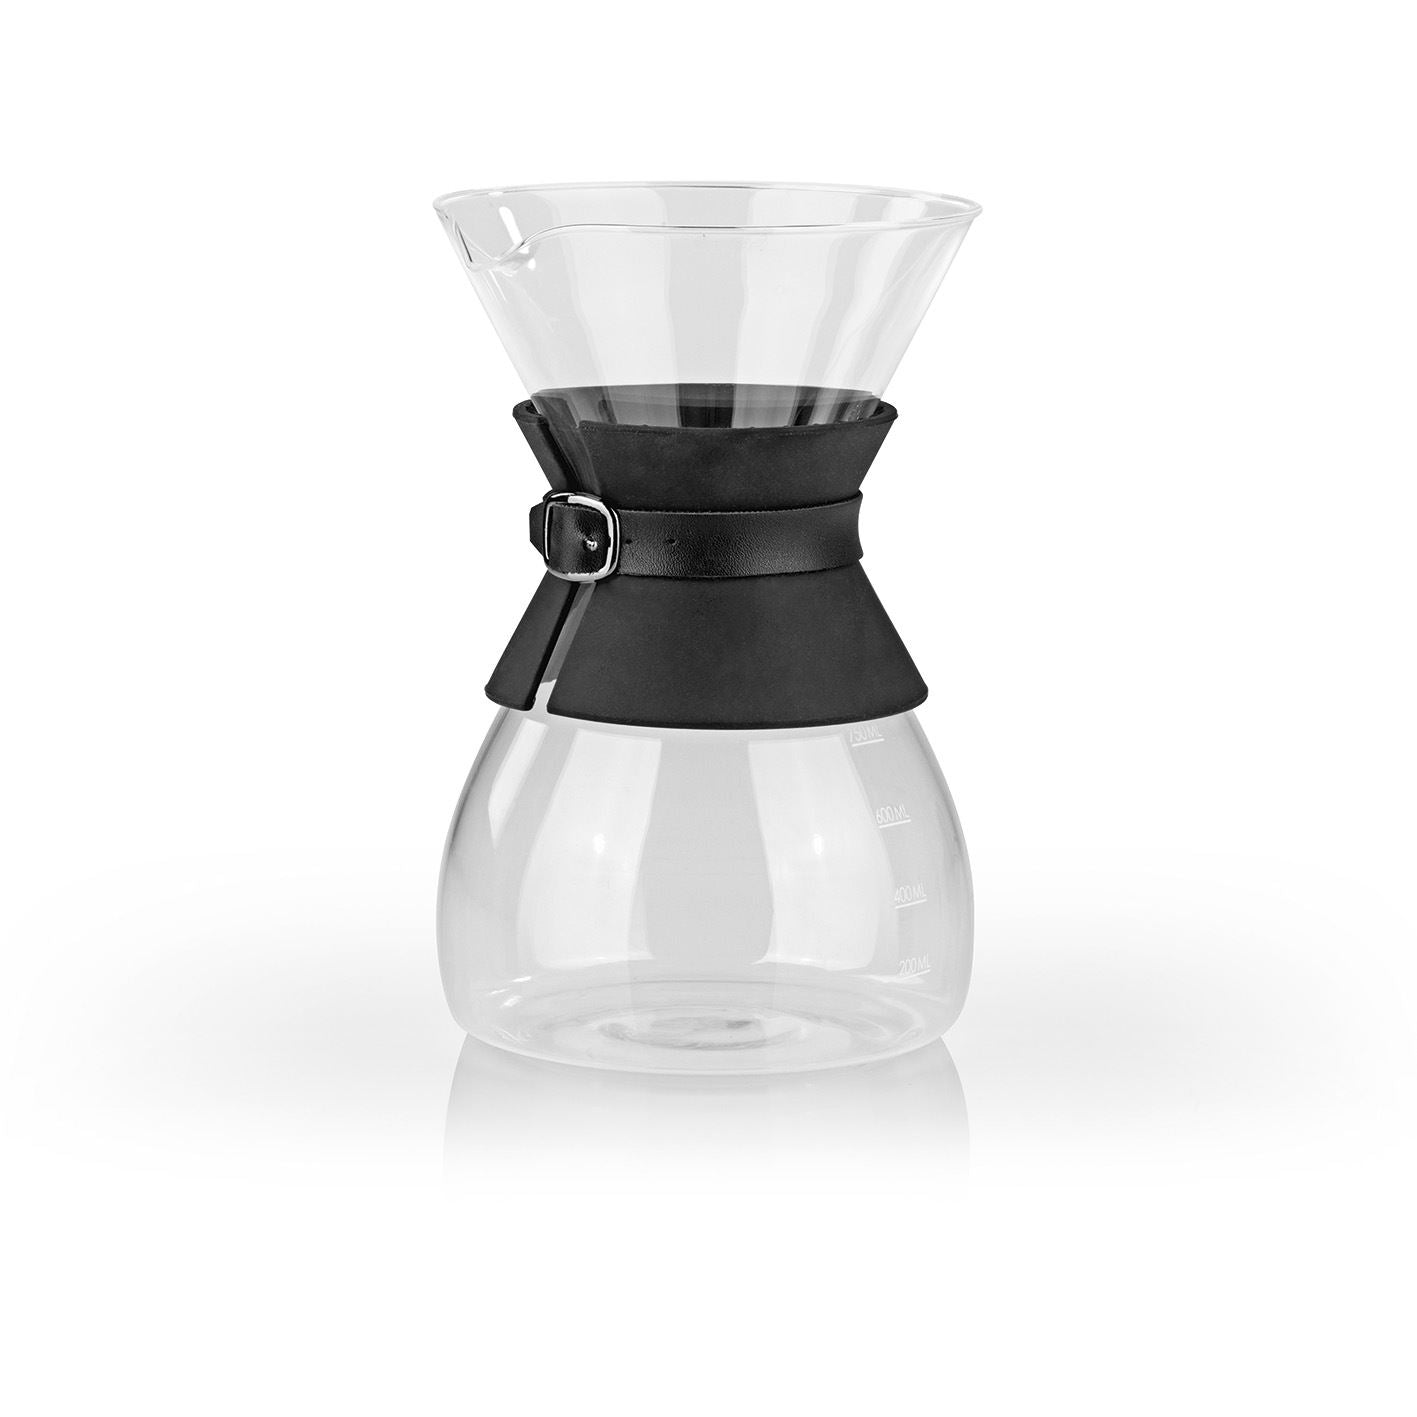 POUR OVER Filter Coffee Machine with Scale - Glass